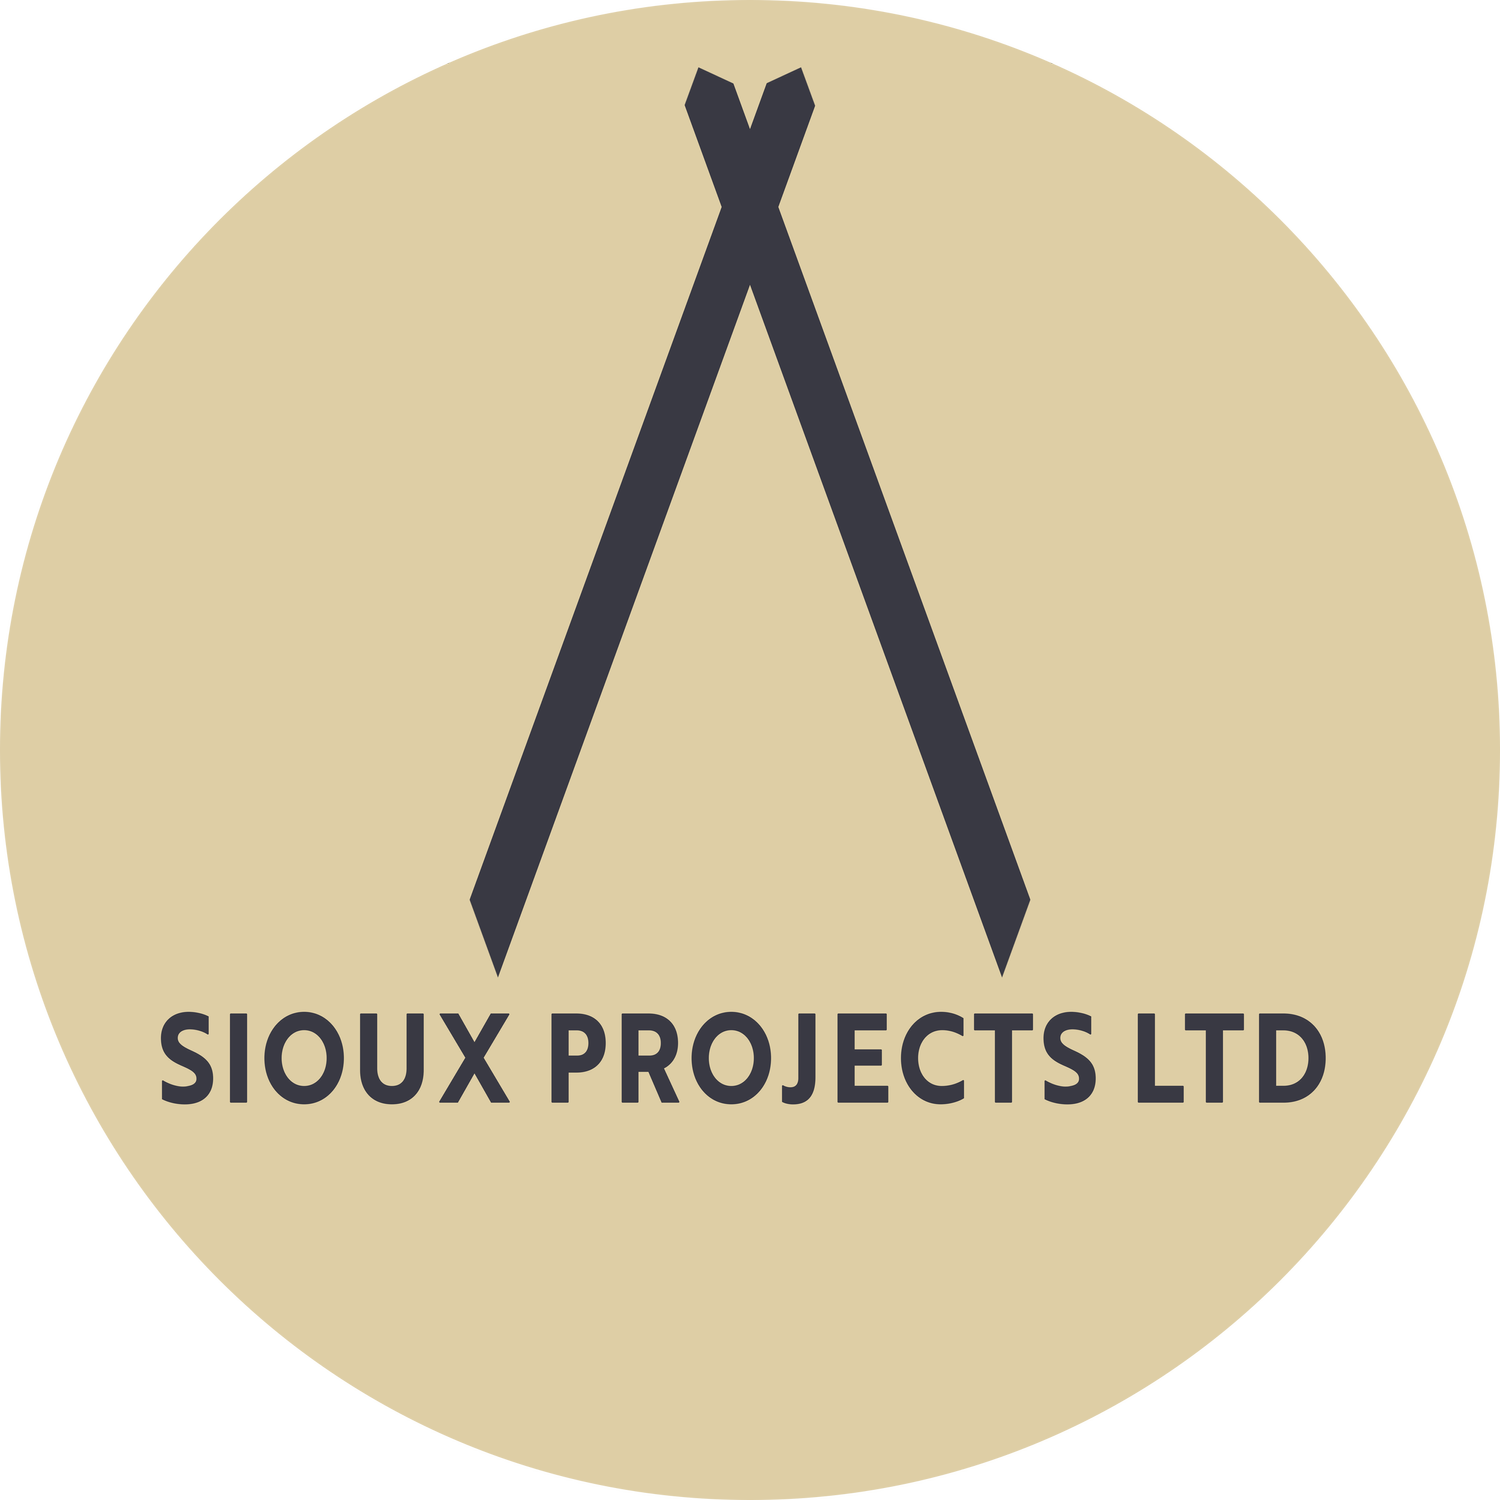 Sioux Projects LTD